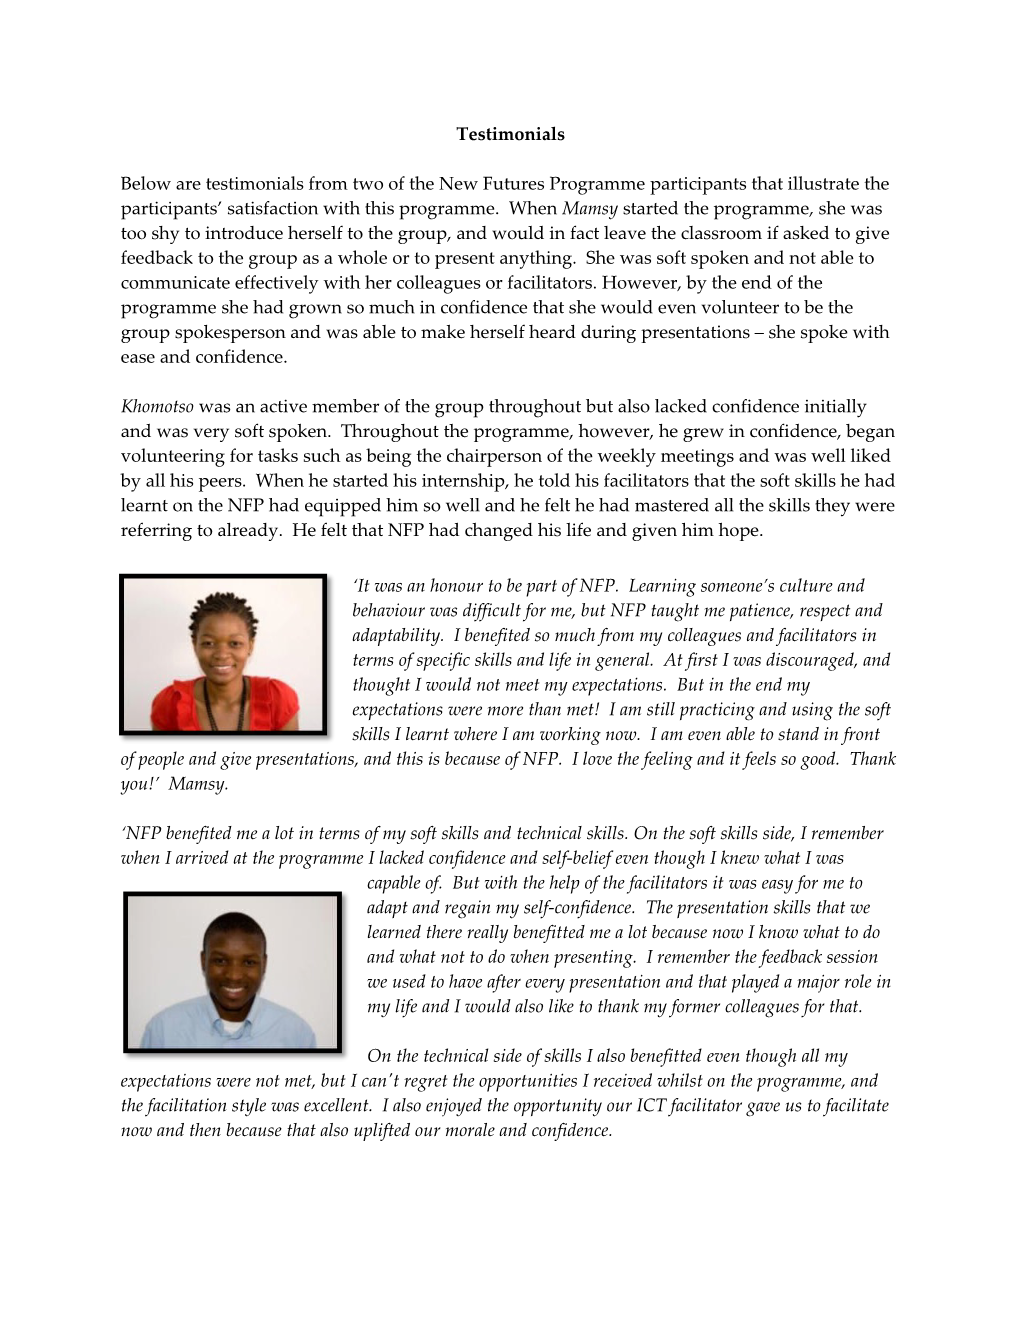 Below Are Testimonials from Two of the New Futures Programme Participants That Illustrate